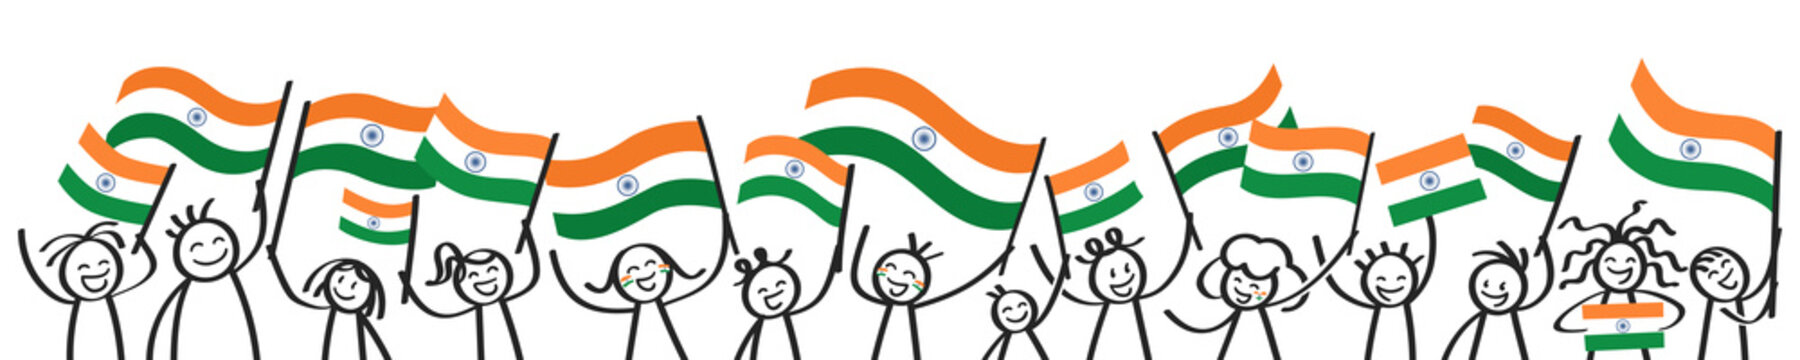 Cheering crowd of happy stick figures with Indian national flags, smiling India supporters, sports fans isolated on white background